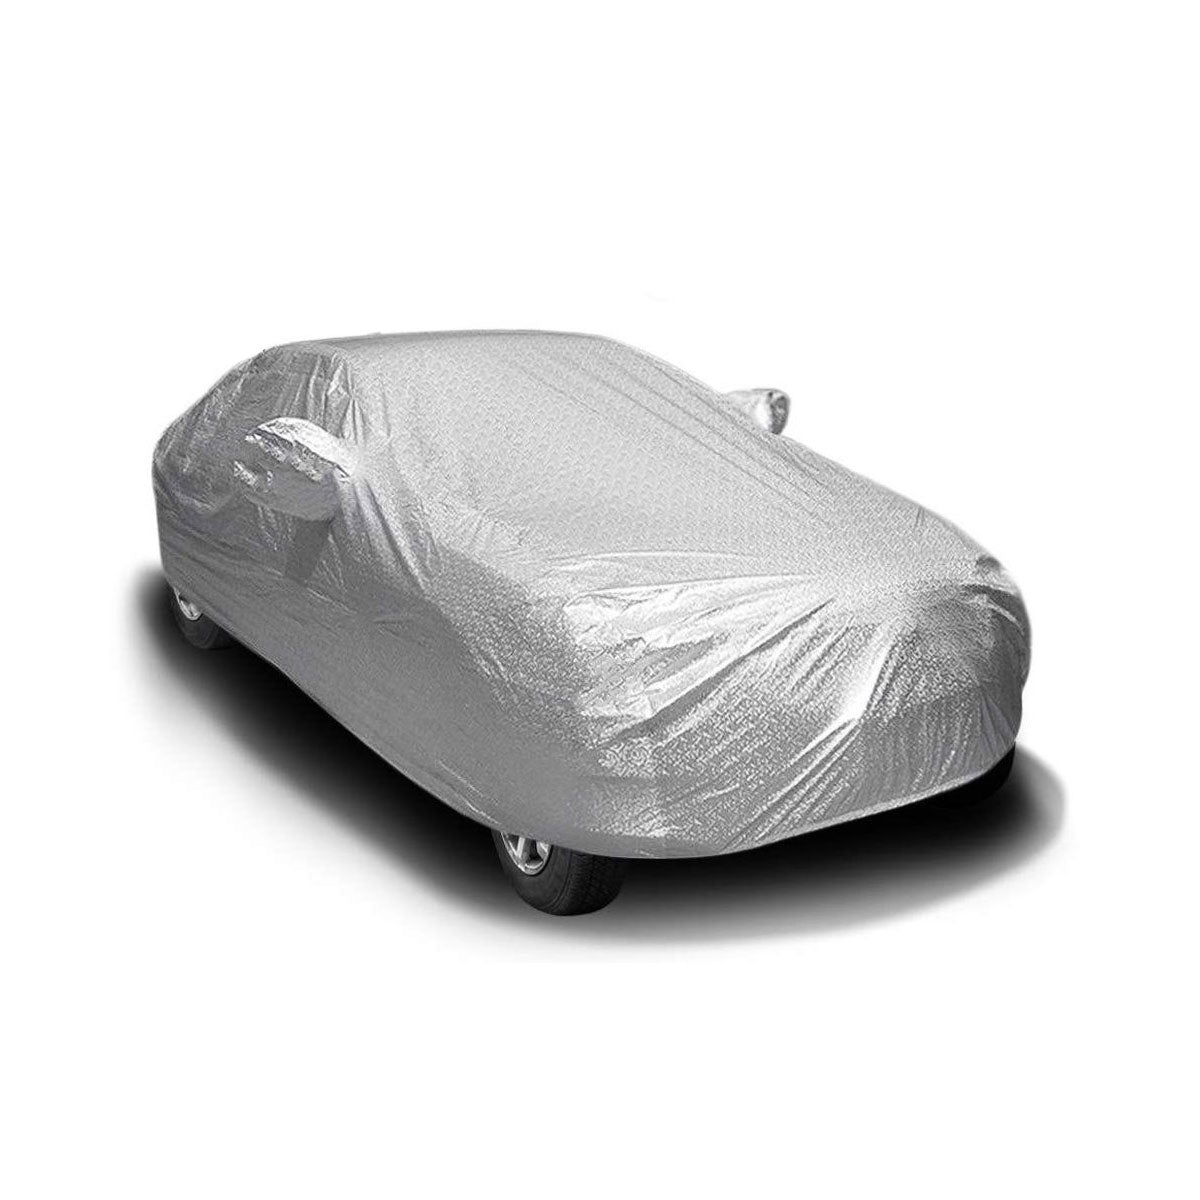 Oshotto Spyro Silver Anti Reflective, dustproof and Water Proof Car Body Cover with Mirror Pockets For MG ZS EV